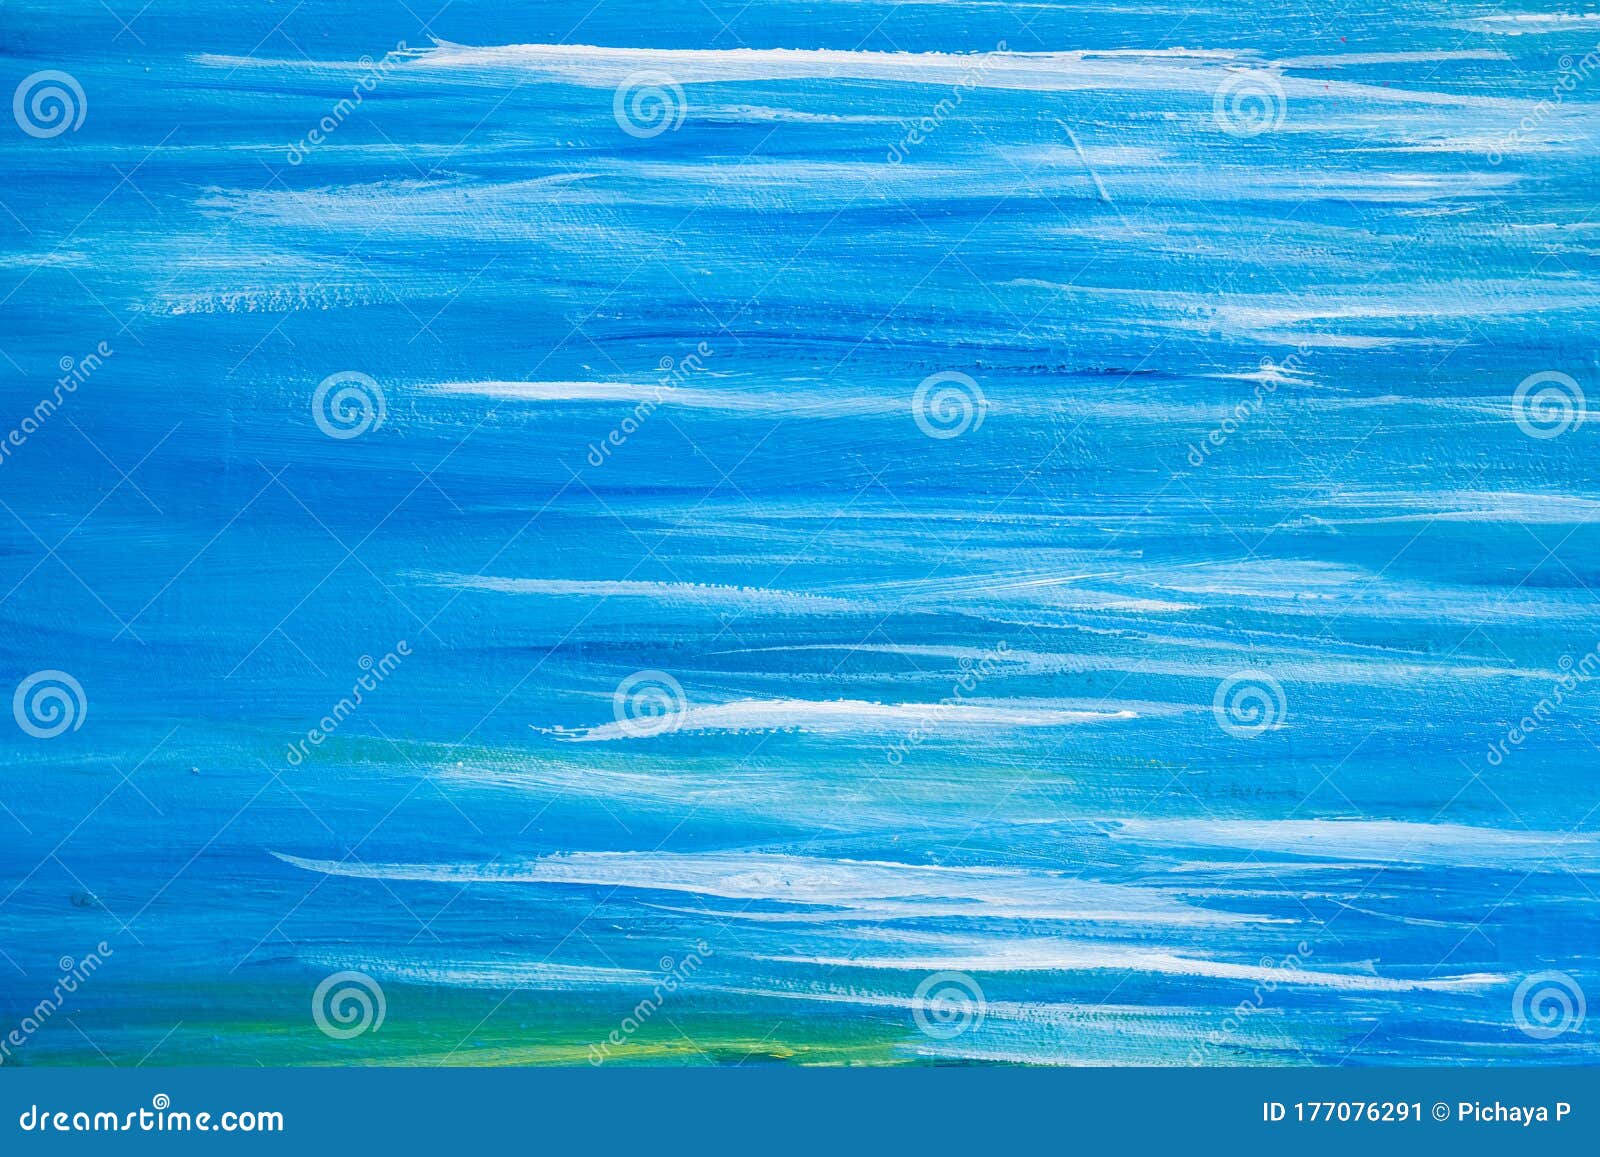 abstract blue texture on background pattern with wall faÃÂ§ade interior decorate